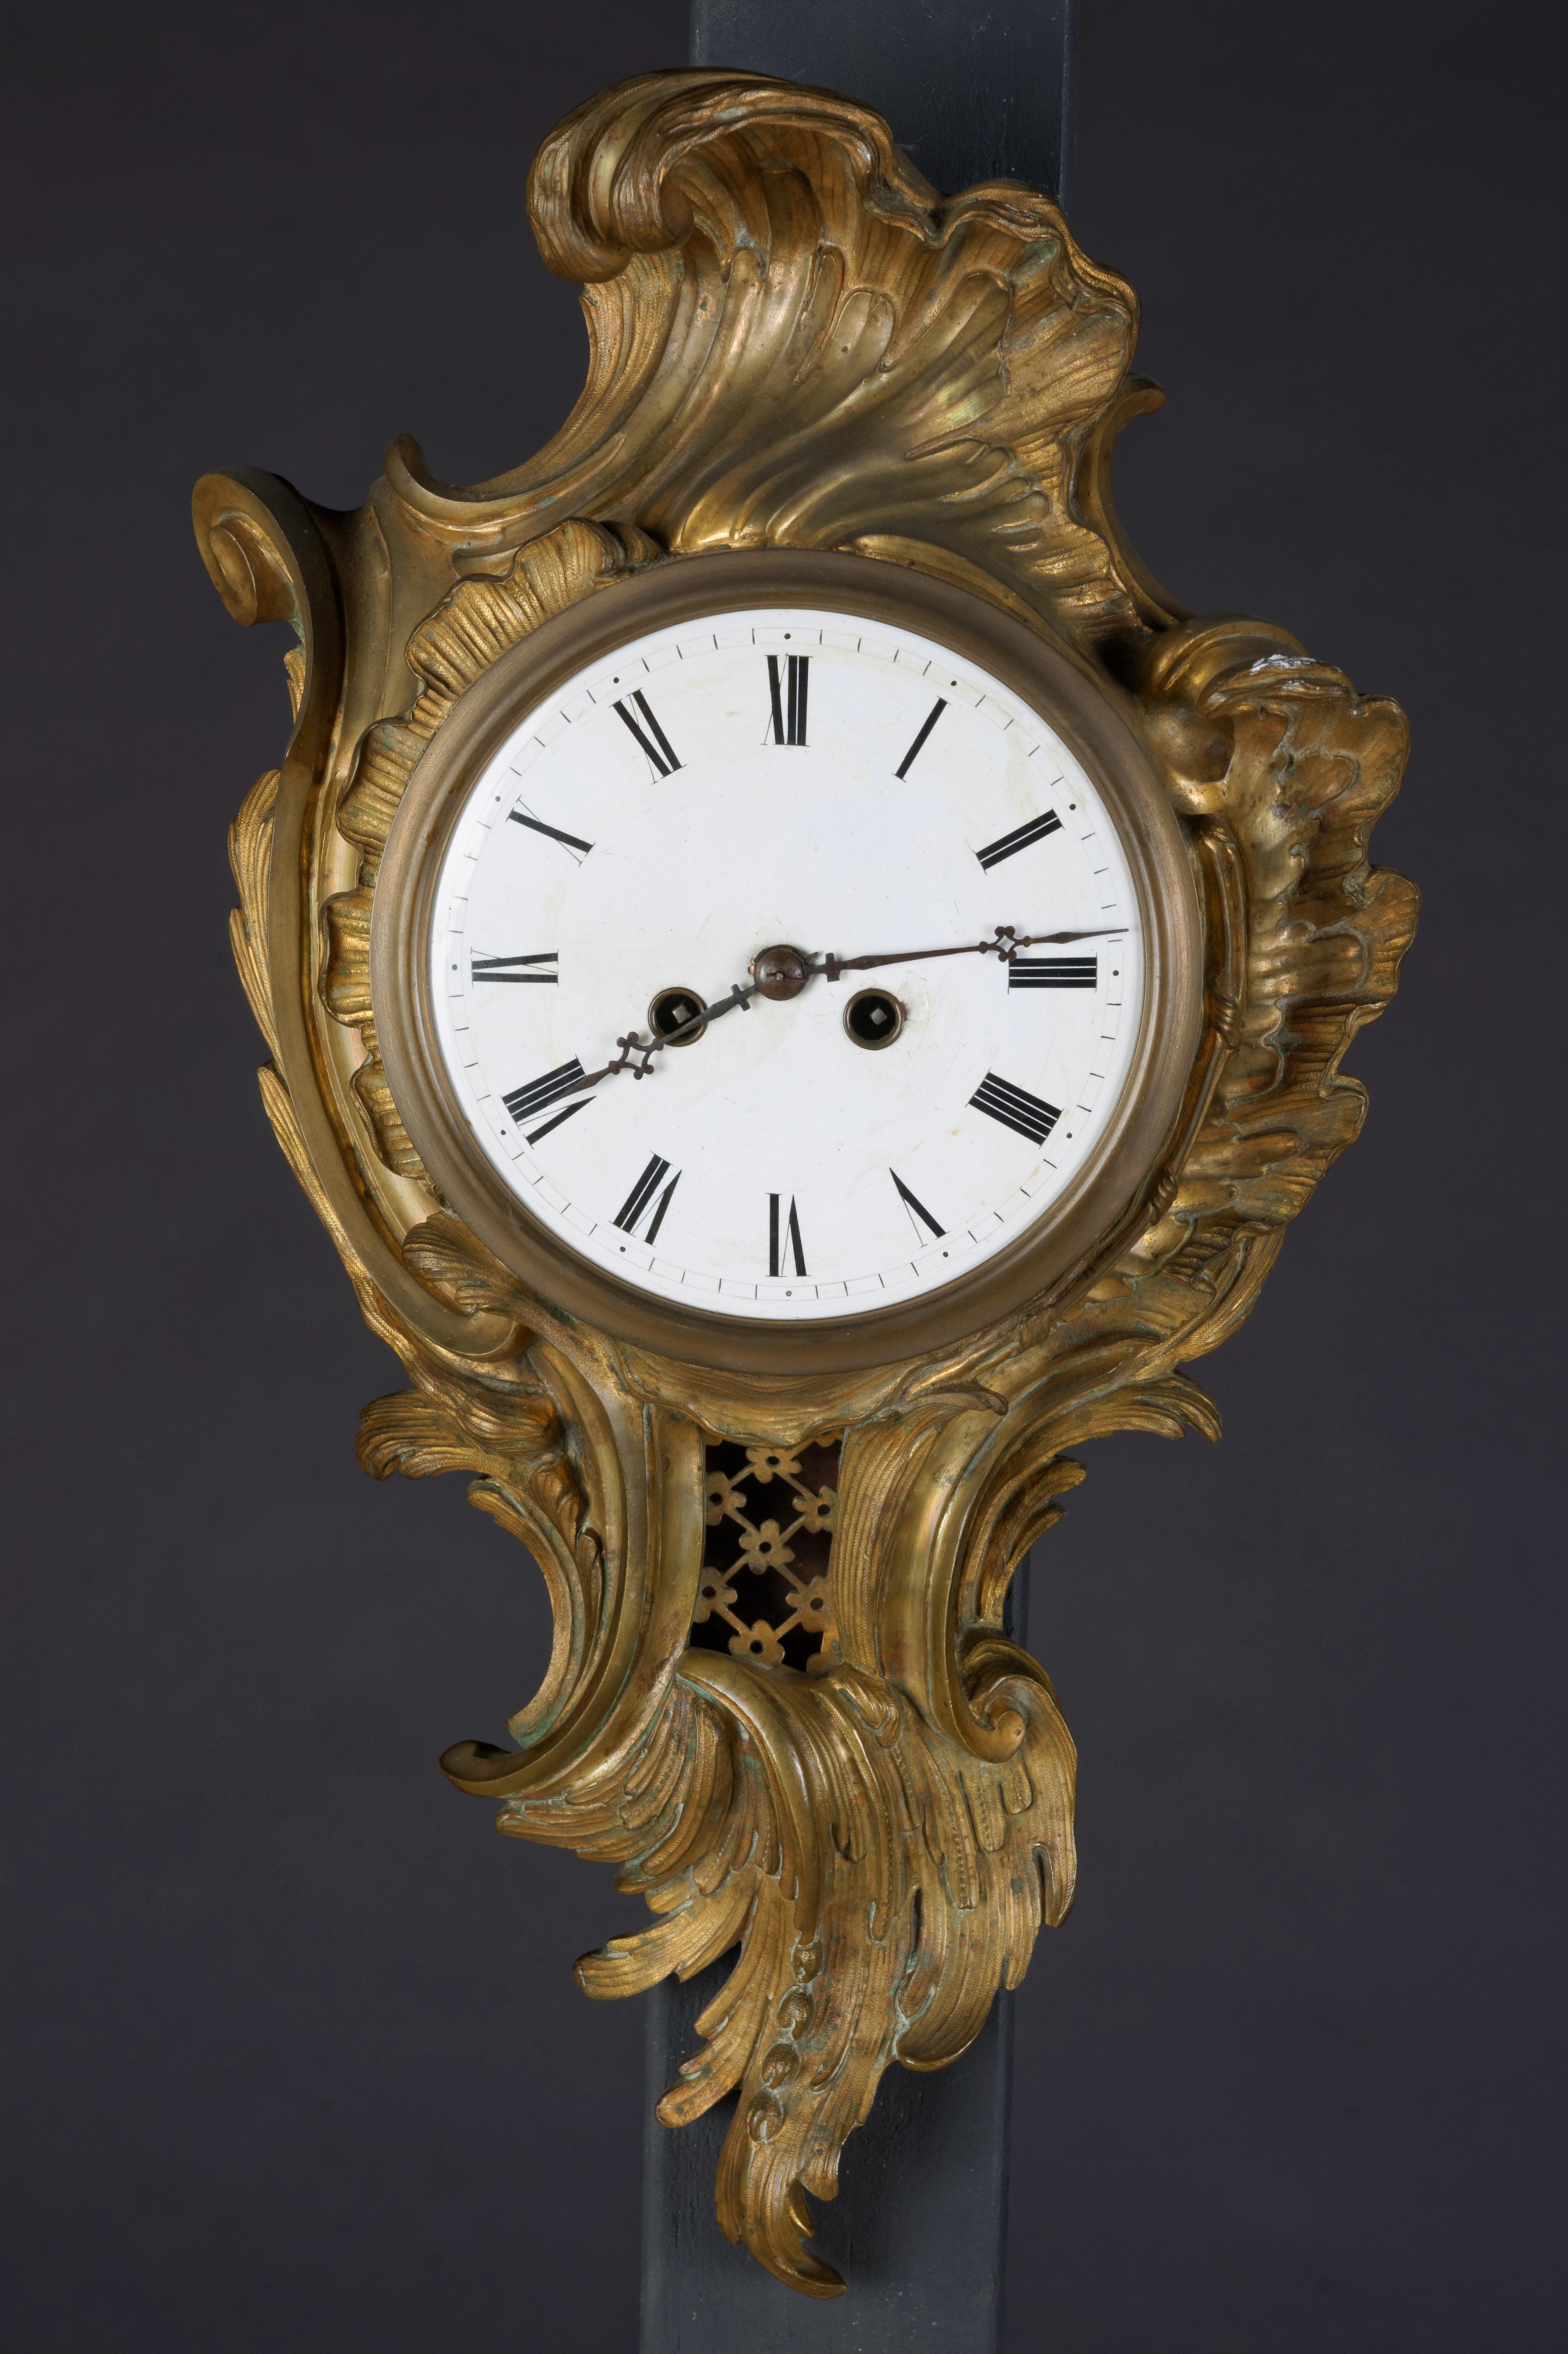 French cartel clock bronze 19th century Napoleon III.
Bronze case, matte gold-plated and polished. Pendulum window. Enamel dial with Arabic. Digits, week work with half-hour strike on bell.

(R-38).